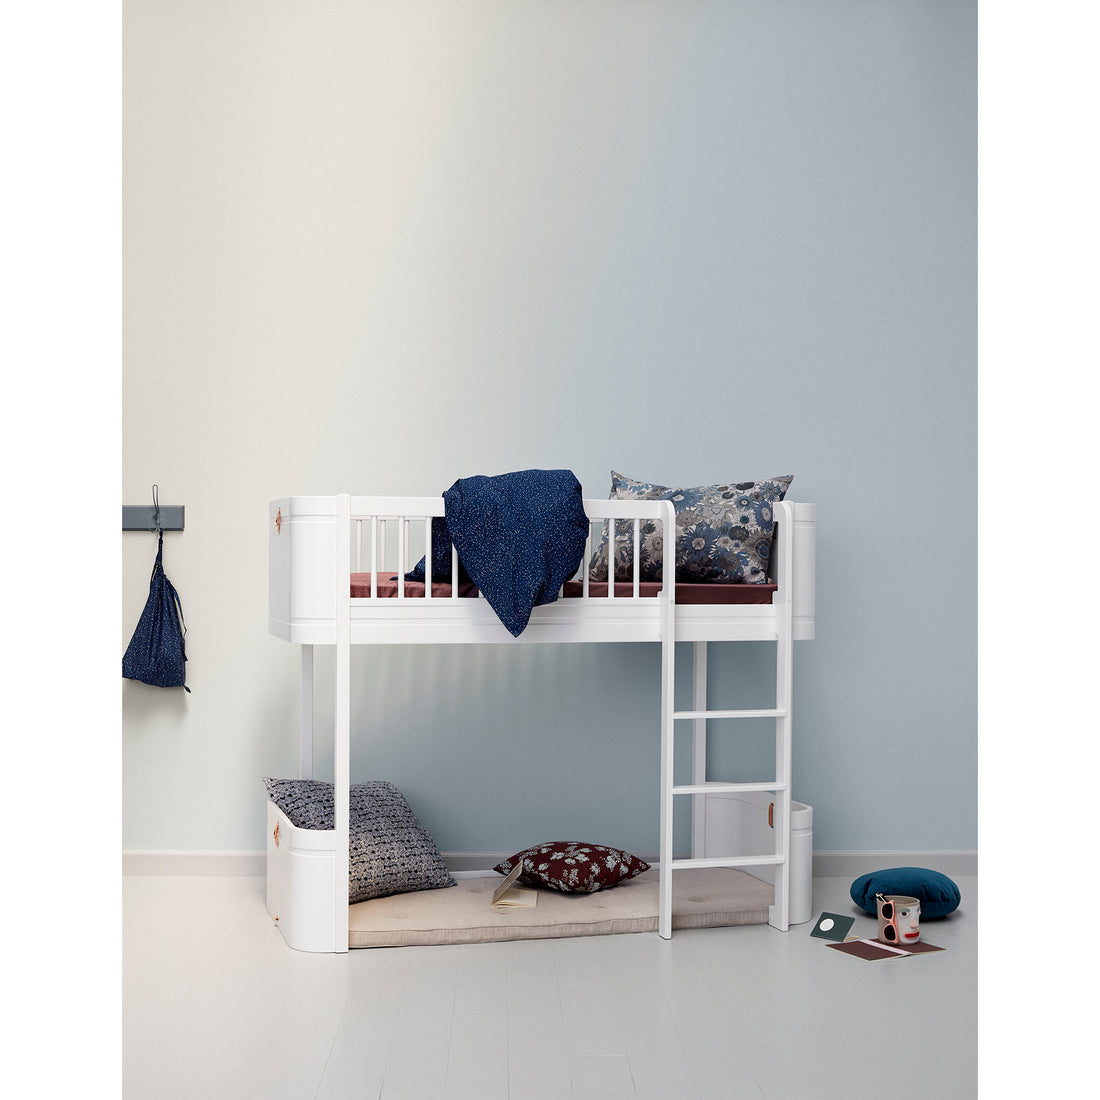 oliver-furniture-wood-mini-with-low-loft-bed-ladder-front-68x162cm-white- (12)